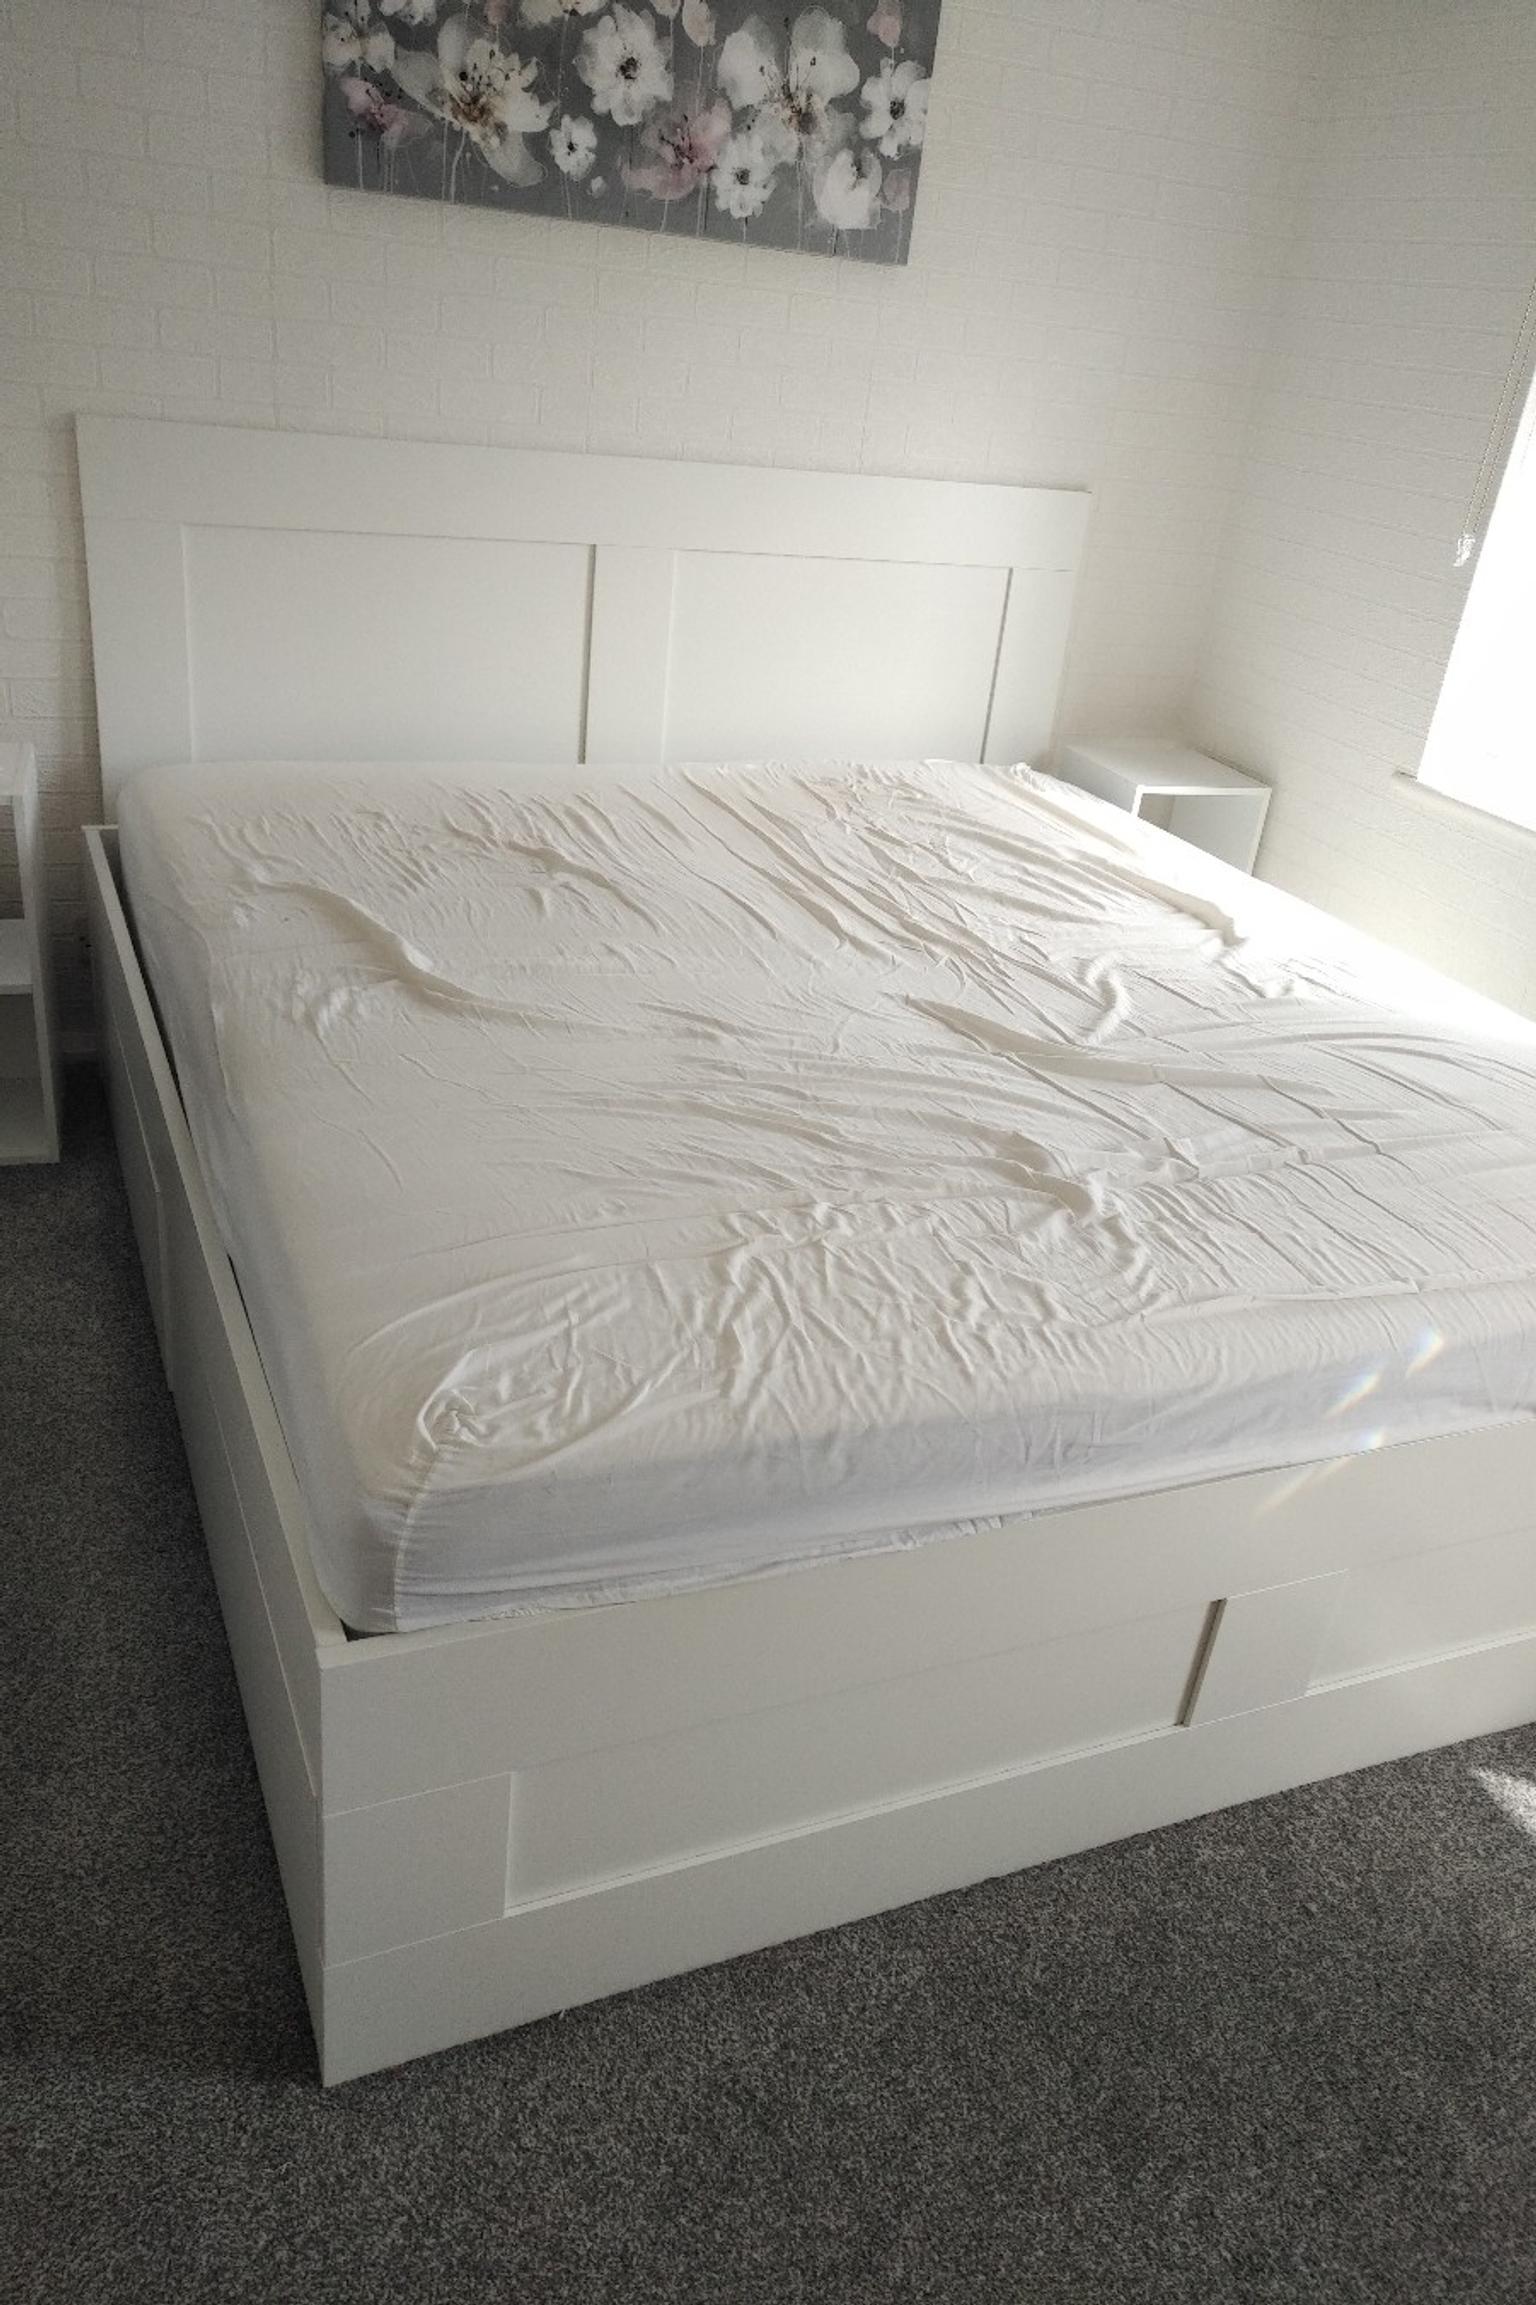 Ikea Brimnes Superking Bed In South, Super King Size Bed With Storage Ikea